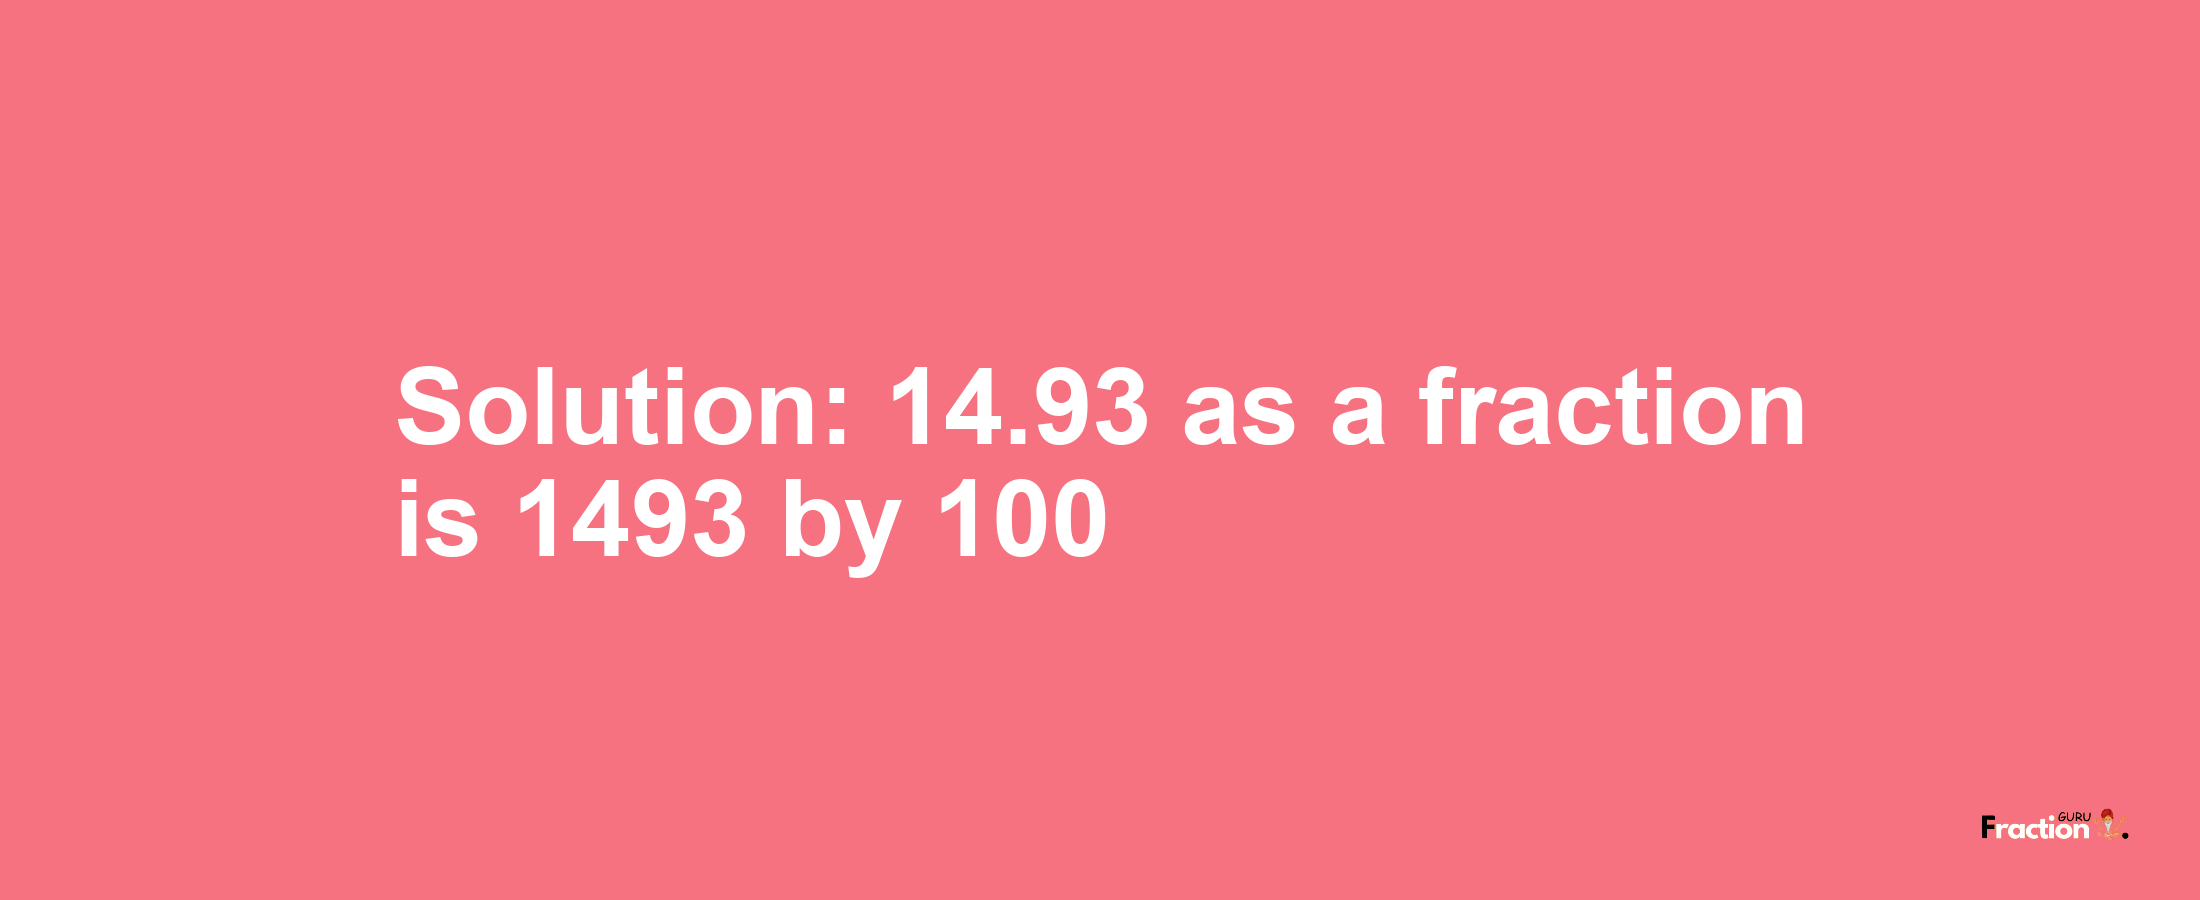 Solution:14.93 as a fraction is 1493/100